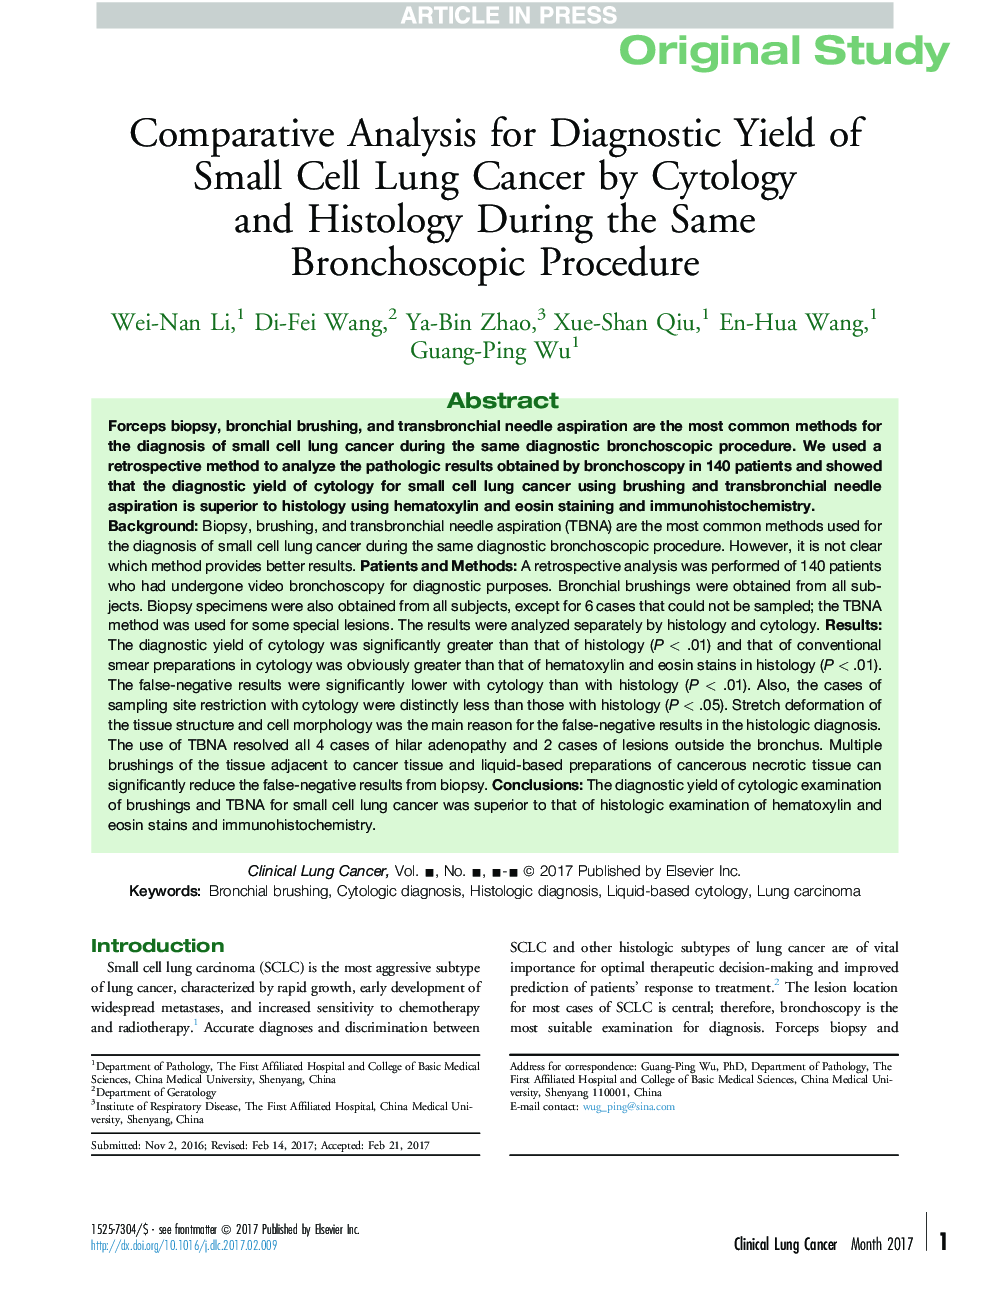 Comparative Analysis for Diagnostic Yield of Small Cell Lung Cancer by Cytology andÂ Histology During the Same BronchoscopicÂ Procedure